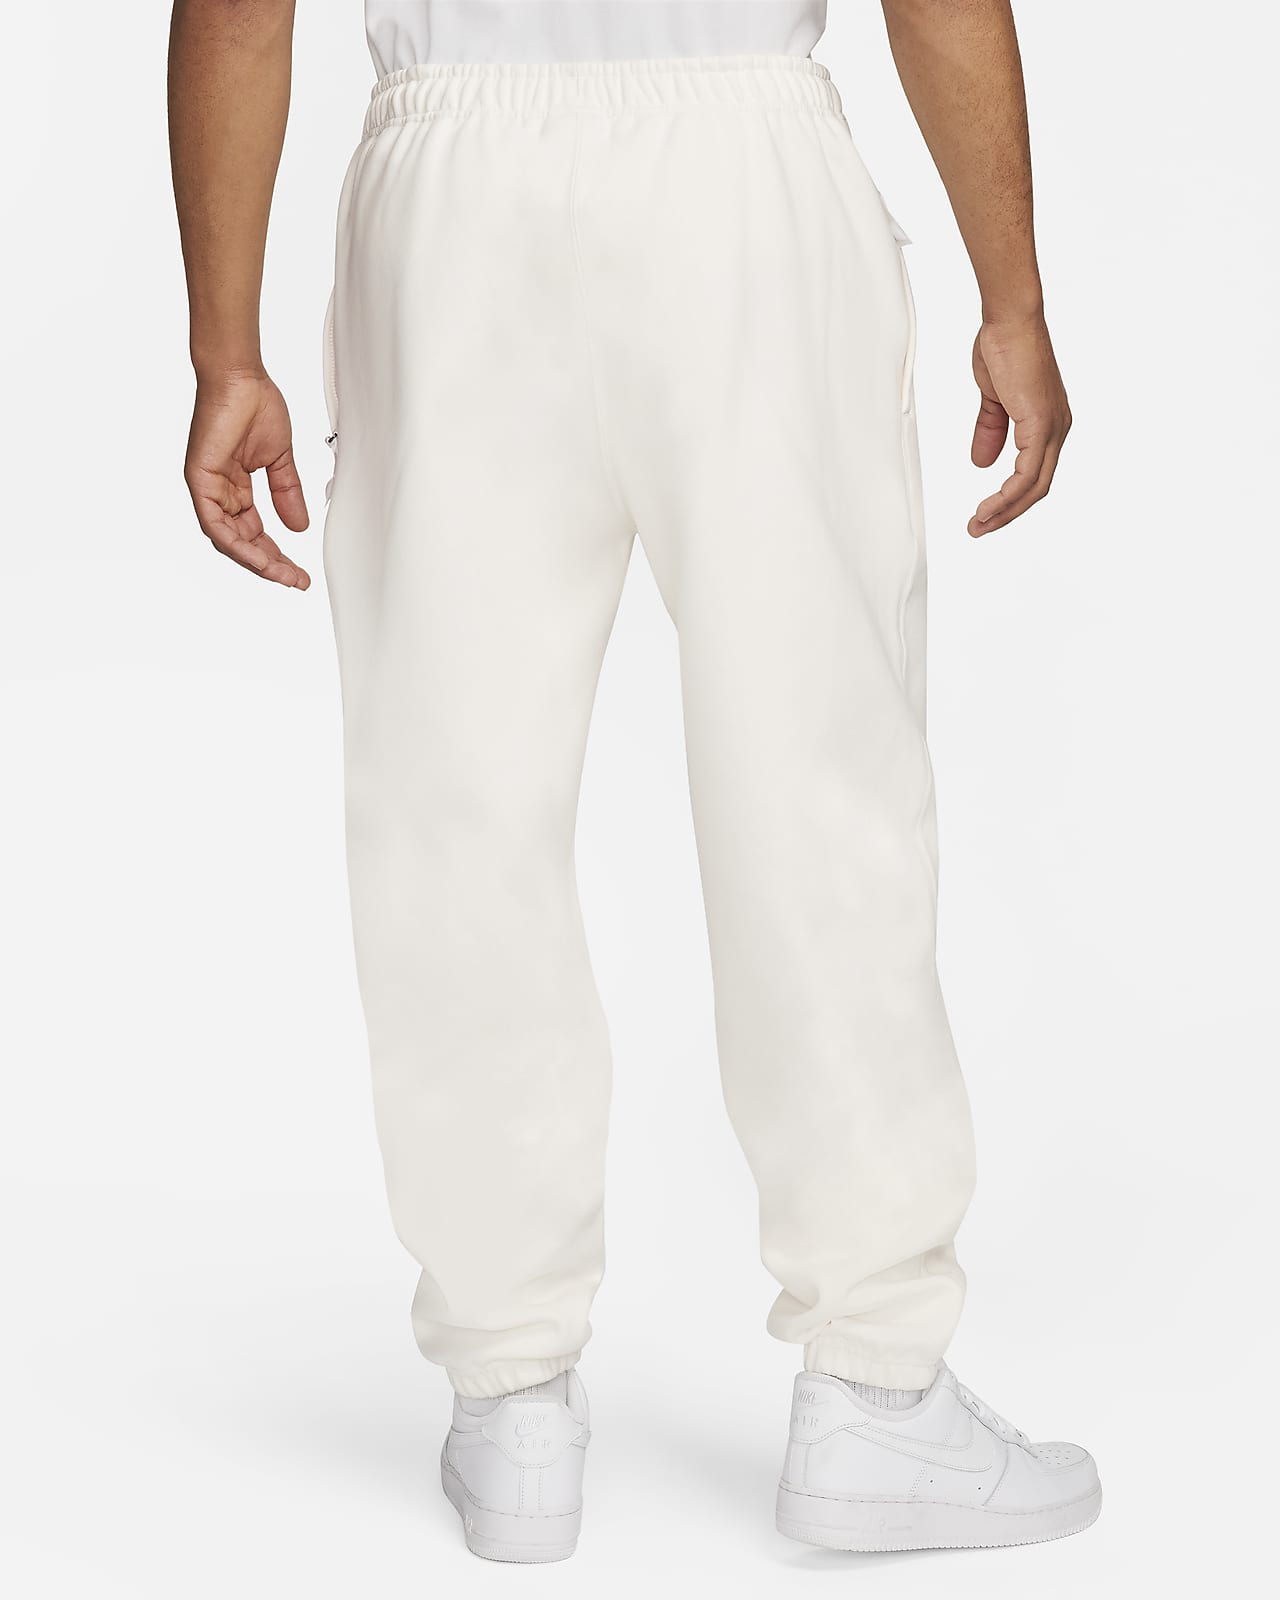 Men's Straight Sweatpants, Men's Up to 50% Off Select Styles